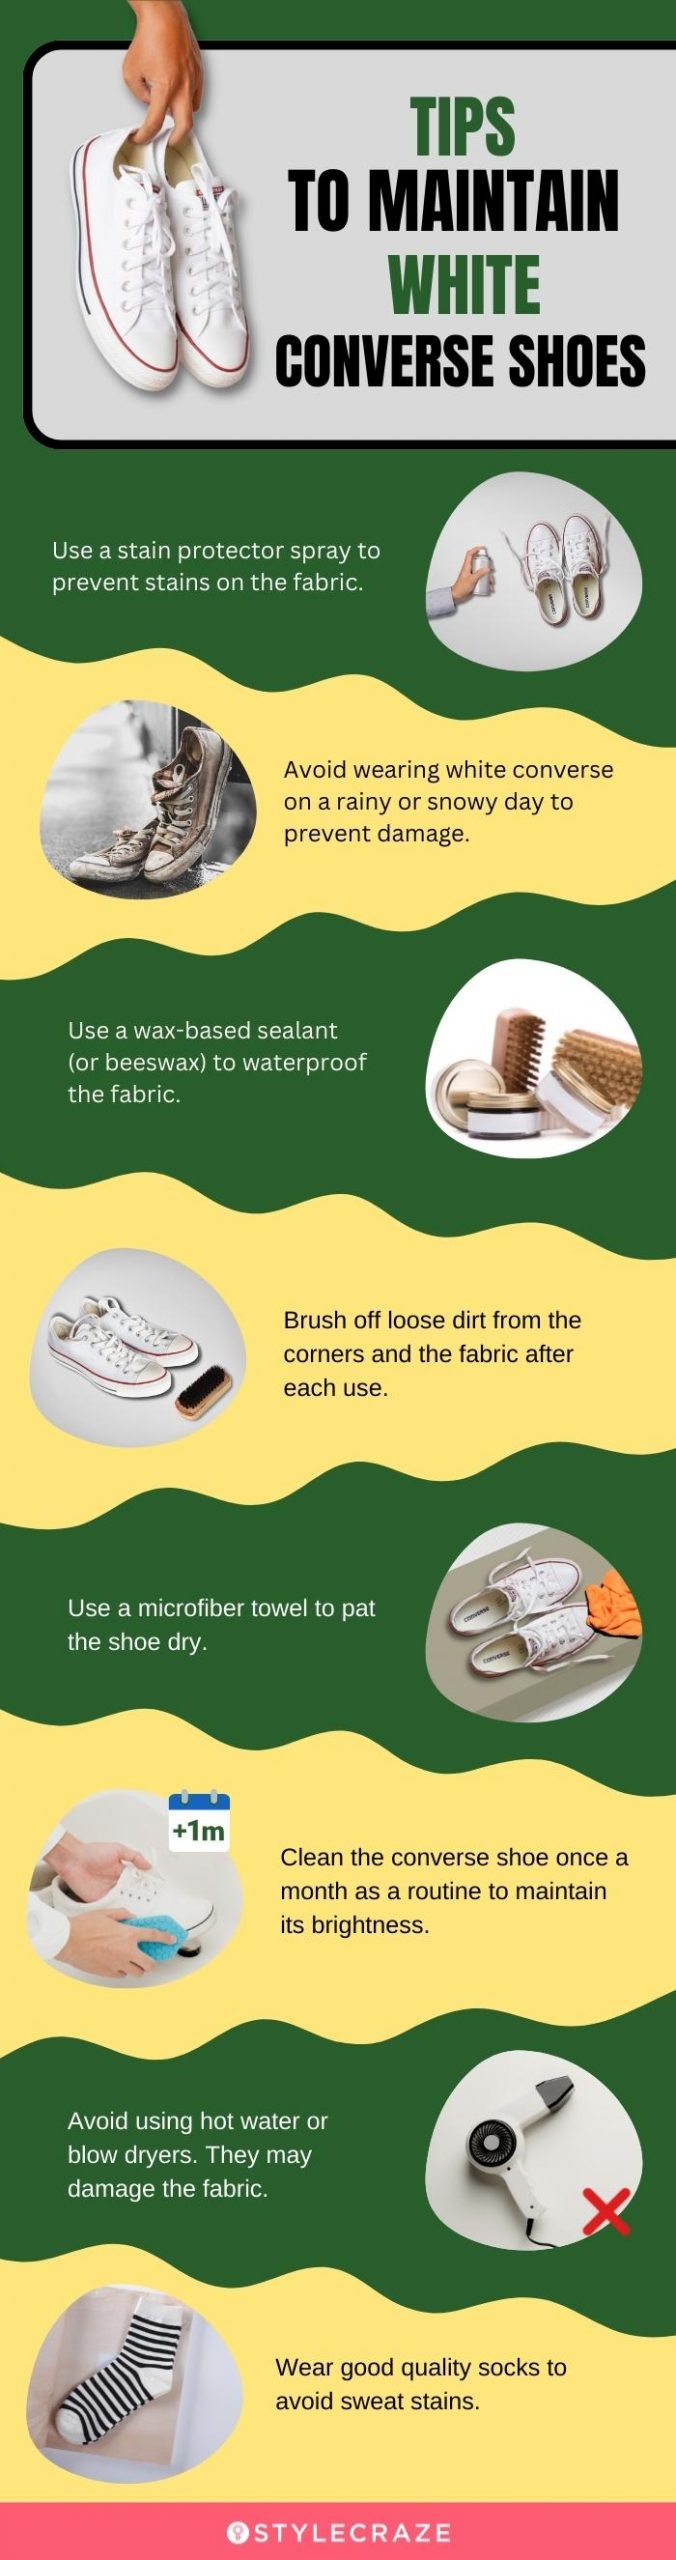 tips to maintain white converse shoes [infographic]